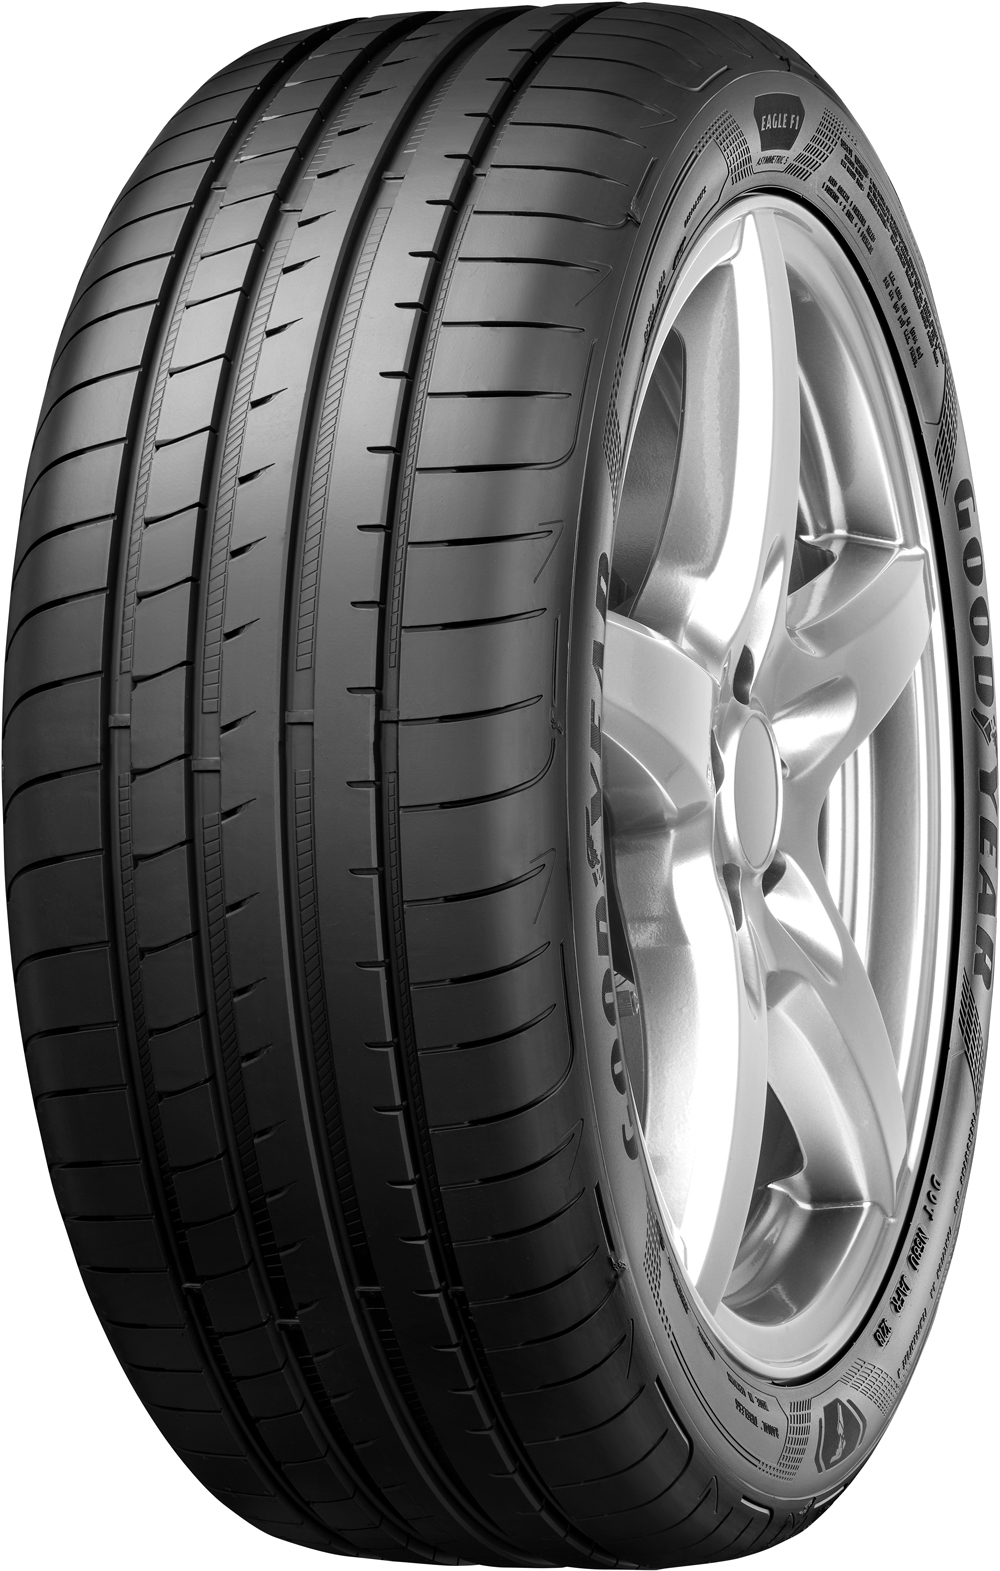 Anvelope auto GOODYEAR EAGF1AS5MX XL MERCEDES FP 255/40 R18 99Y